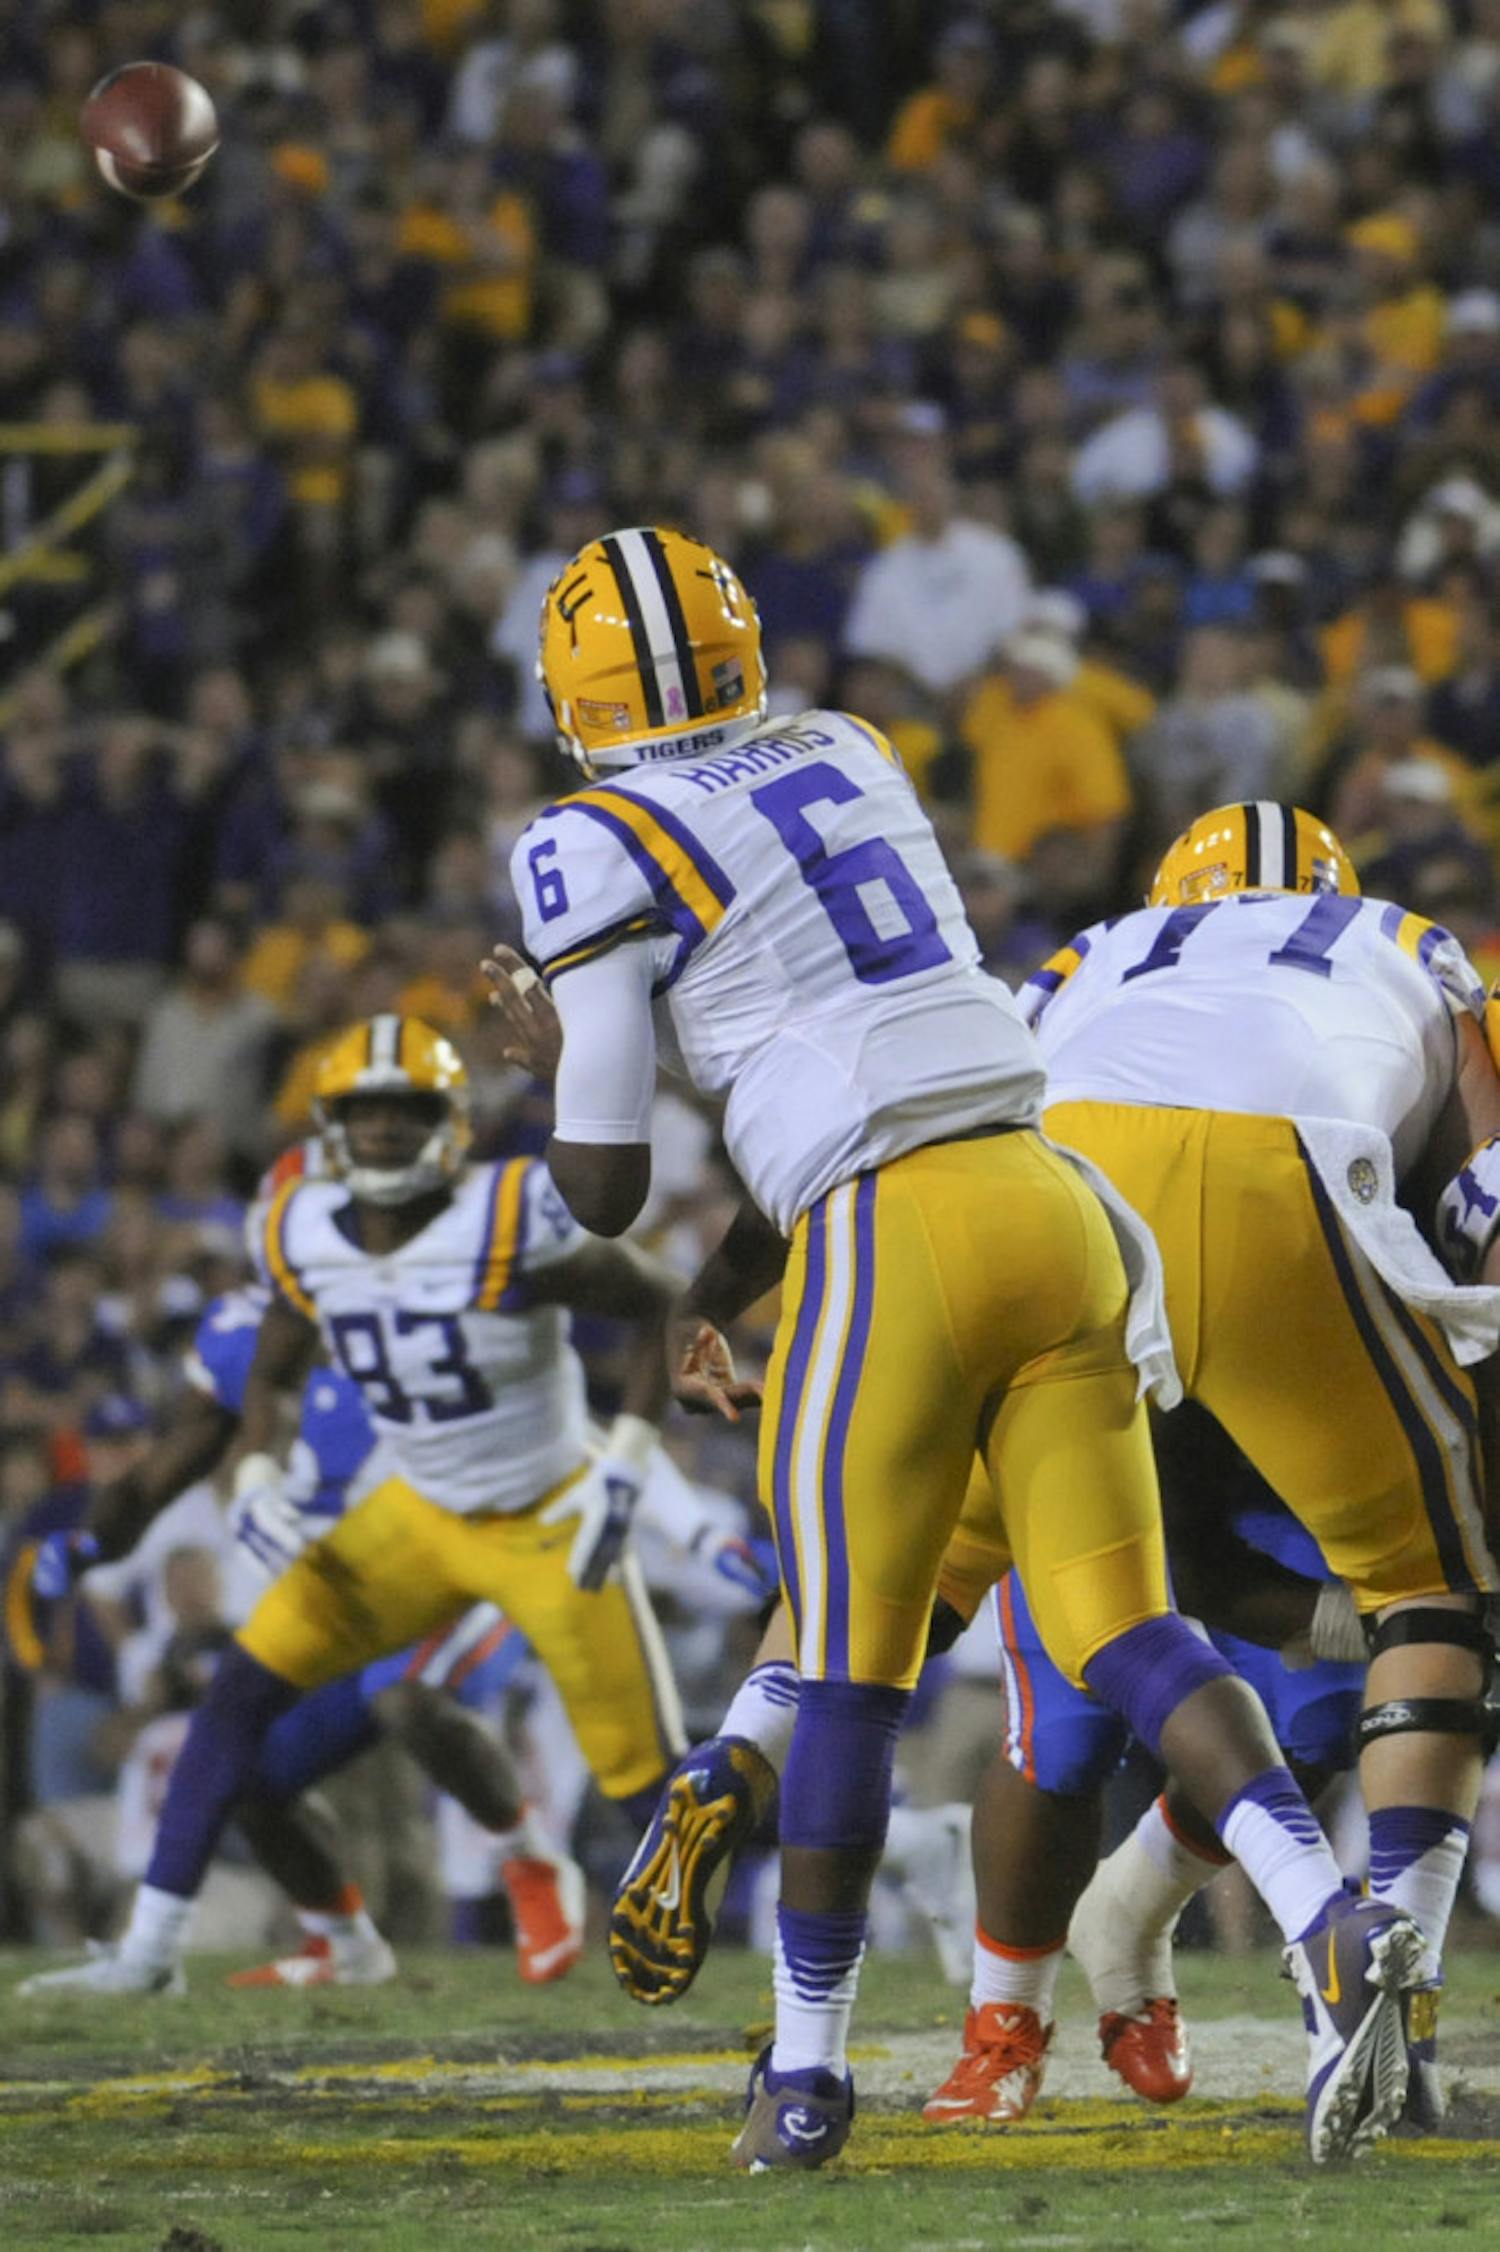 LSU quarterback Brandon Harris attempts a pass during the Tigers' 35-28 win against UF on Oct. 17, 2015, at Tiger Stadium in Baton Rouge, Louisiana.